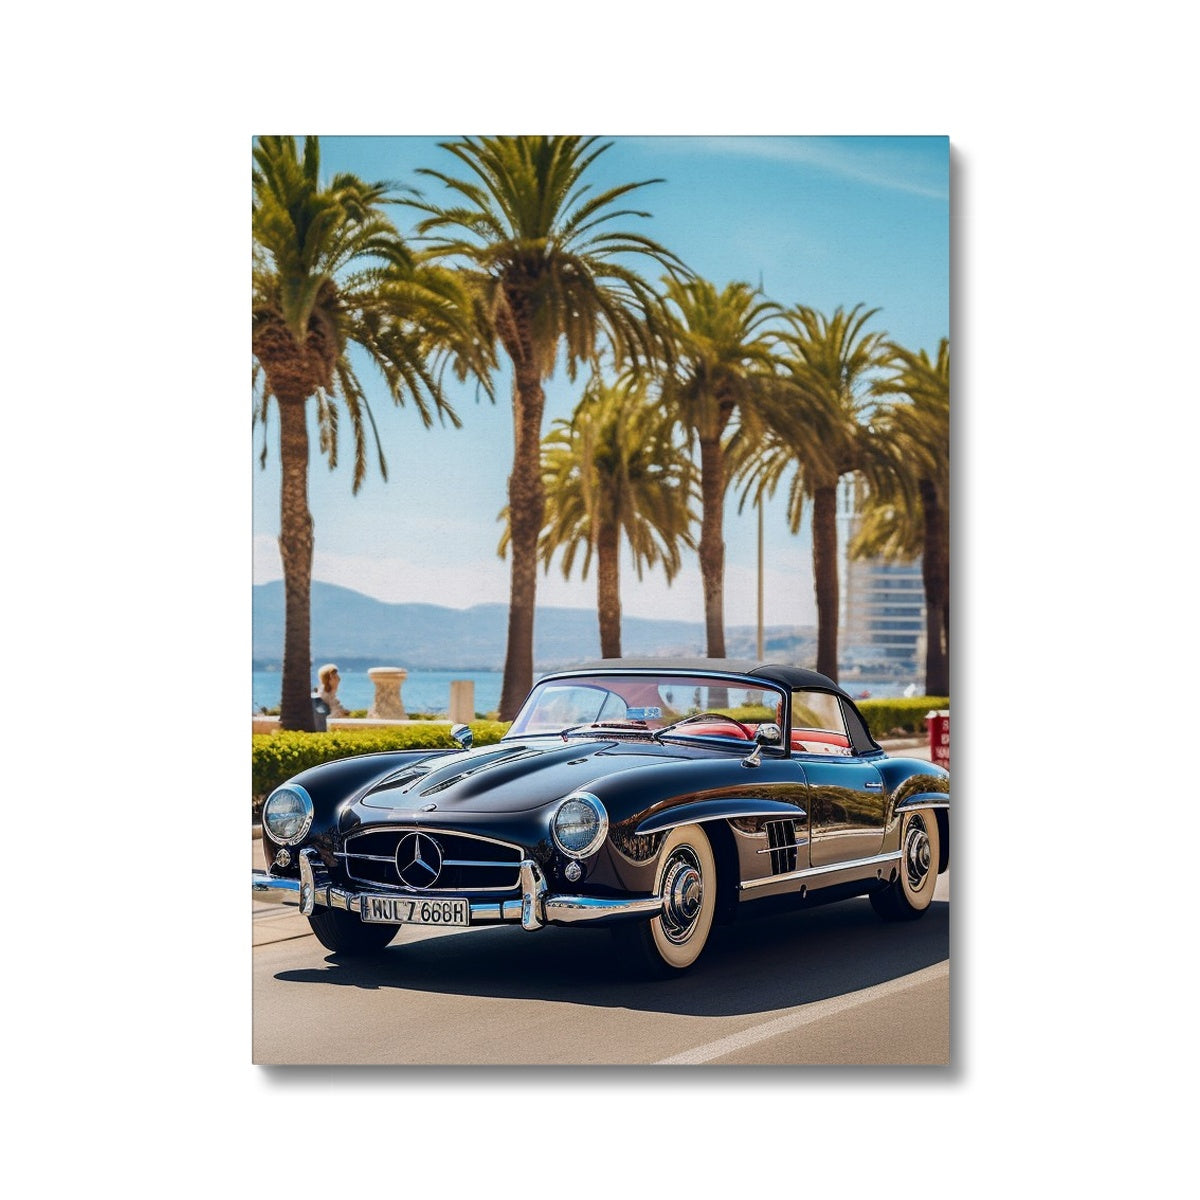 Retro Mercedes, Cruising in Cannes, South of France Summers Canvas